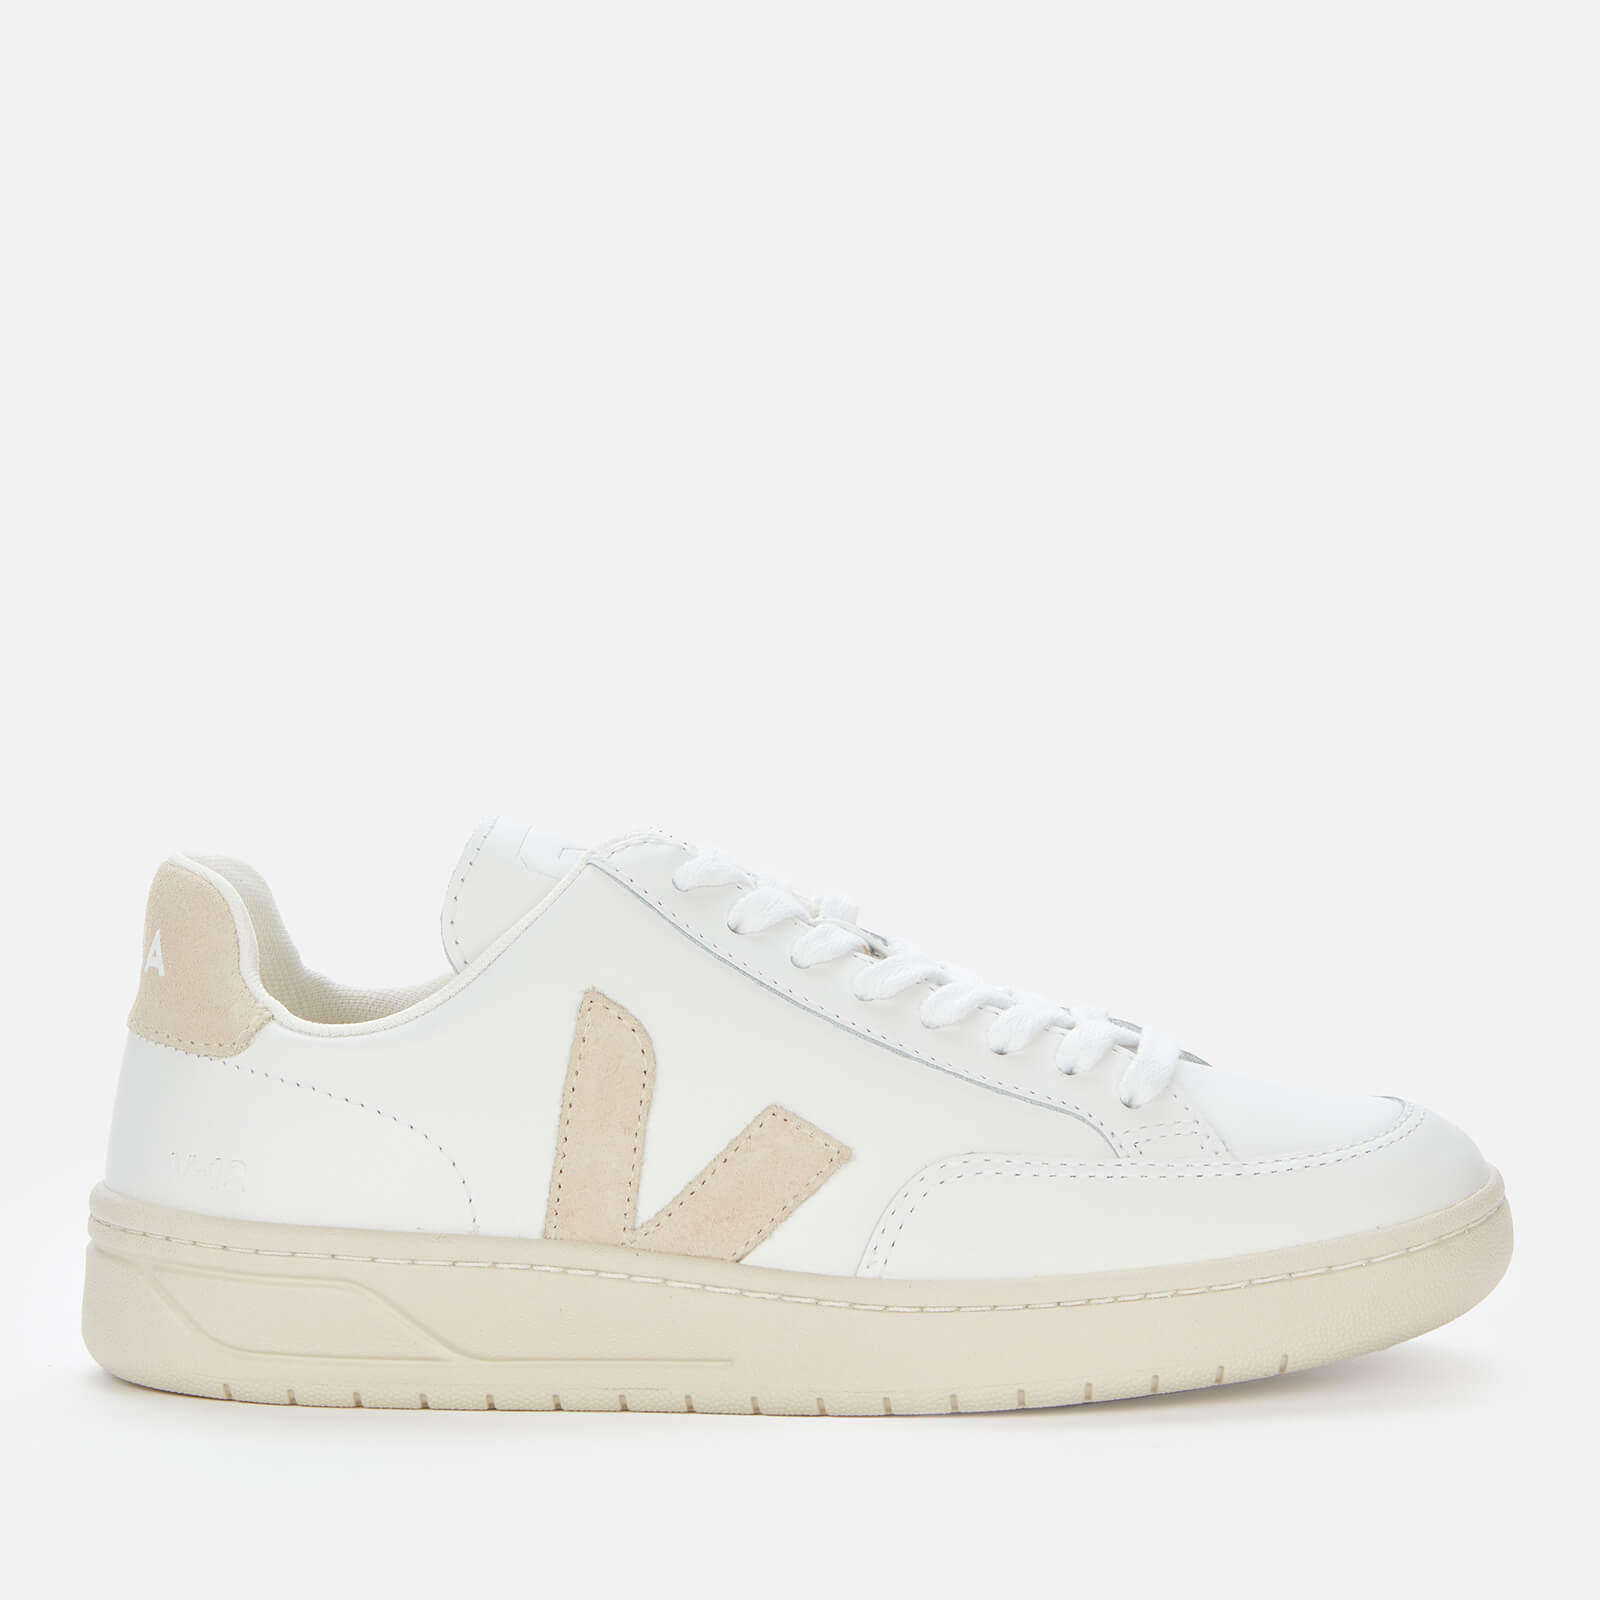 Veja Women's V-12 Leather Trainers - Extra White/Sable - UK 4